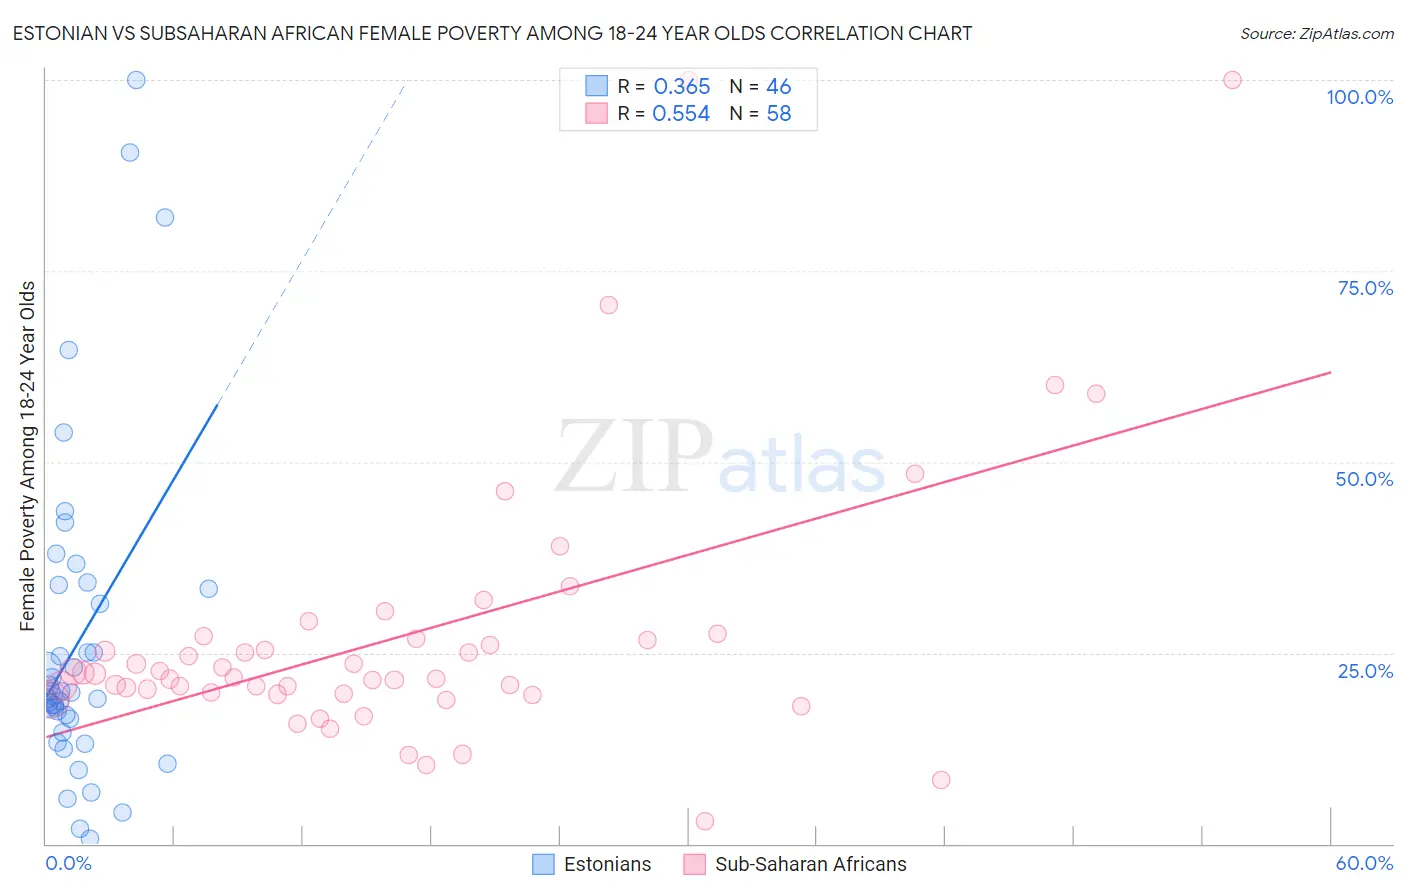 Estonian vs Subsaharan African Female Poverty Among 18-24 Year Olds